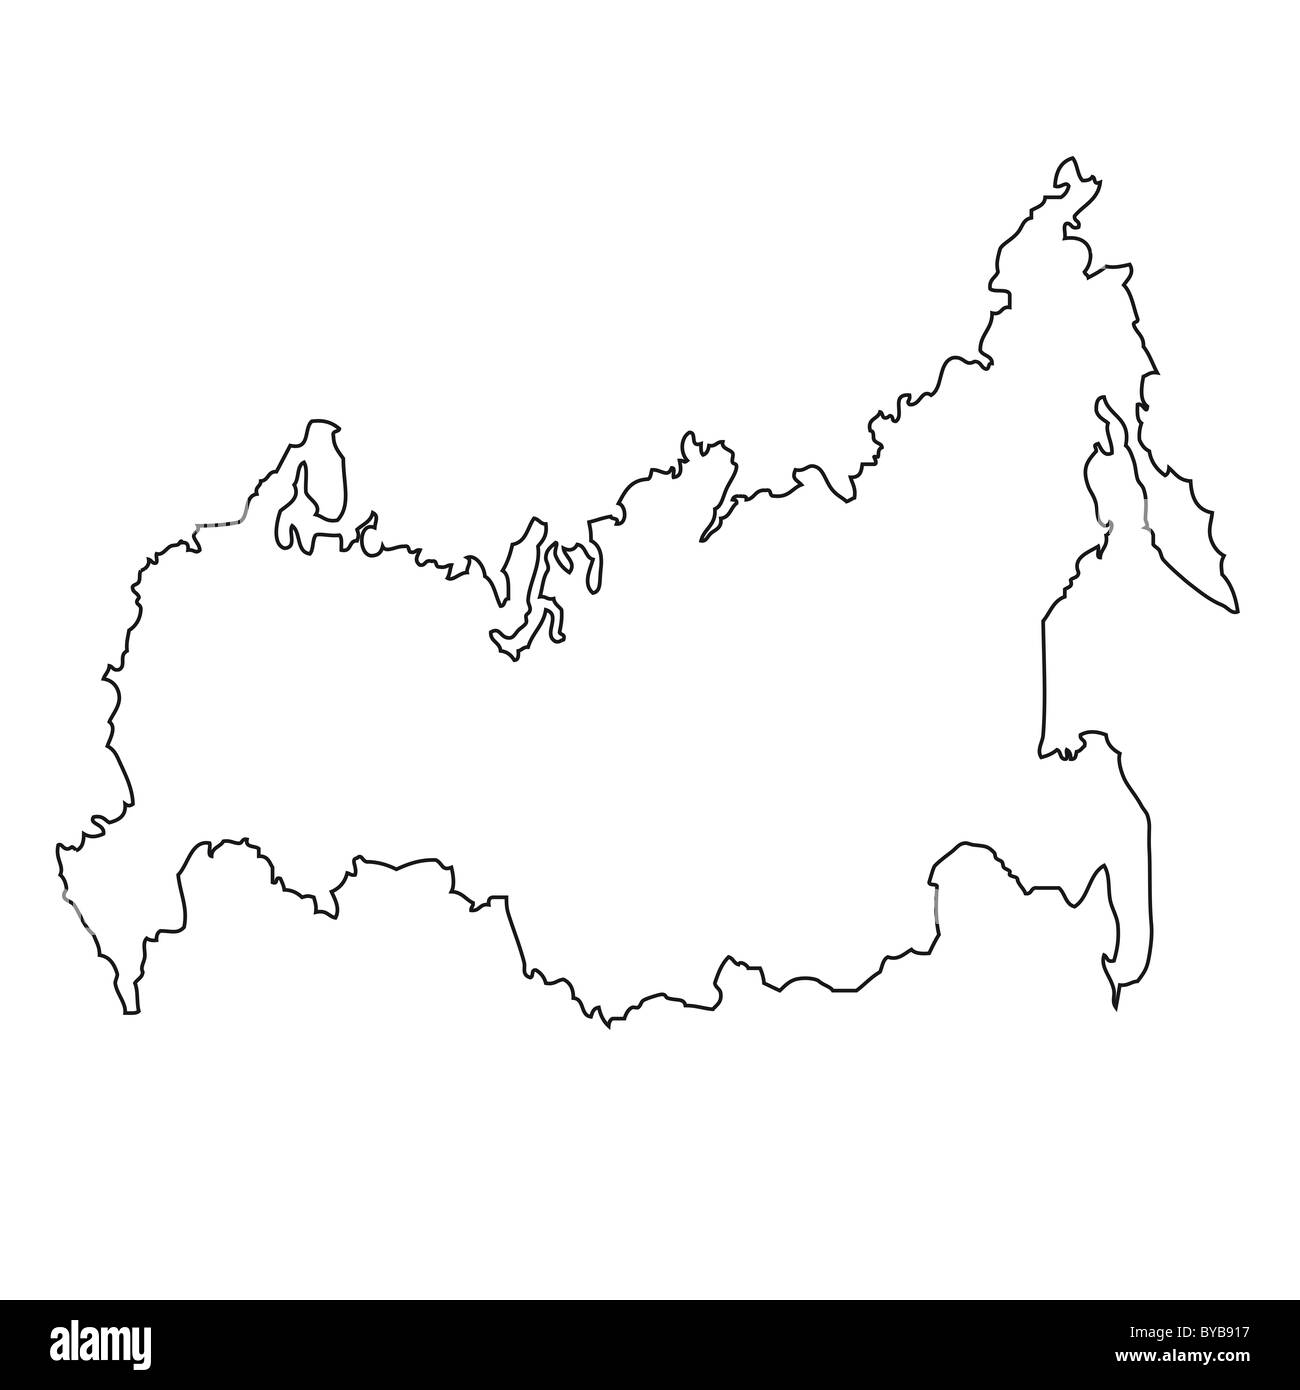 Outline, map of Russia Stock Photo